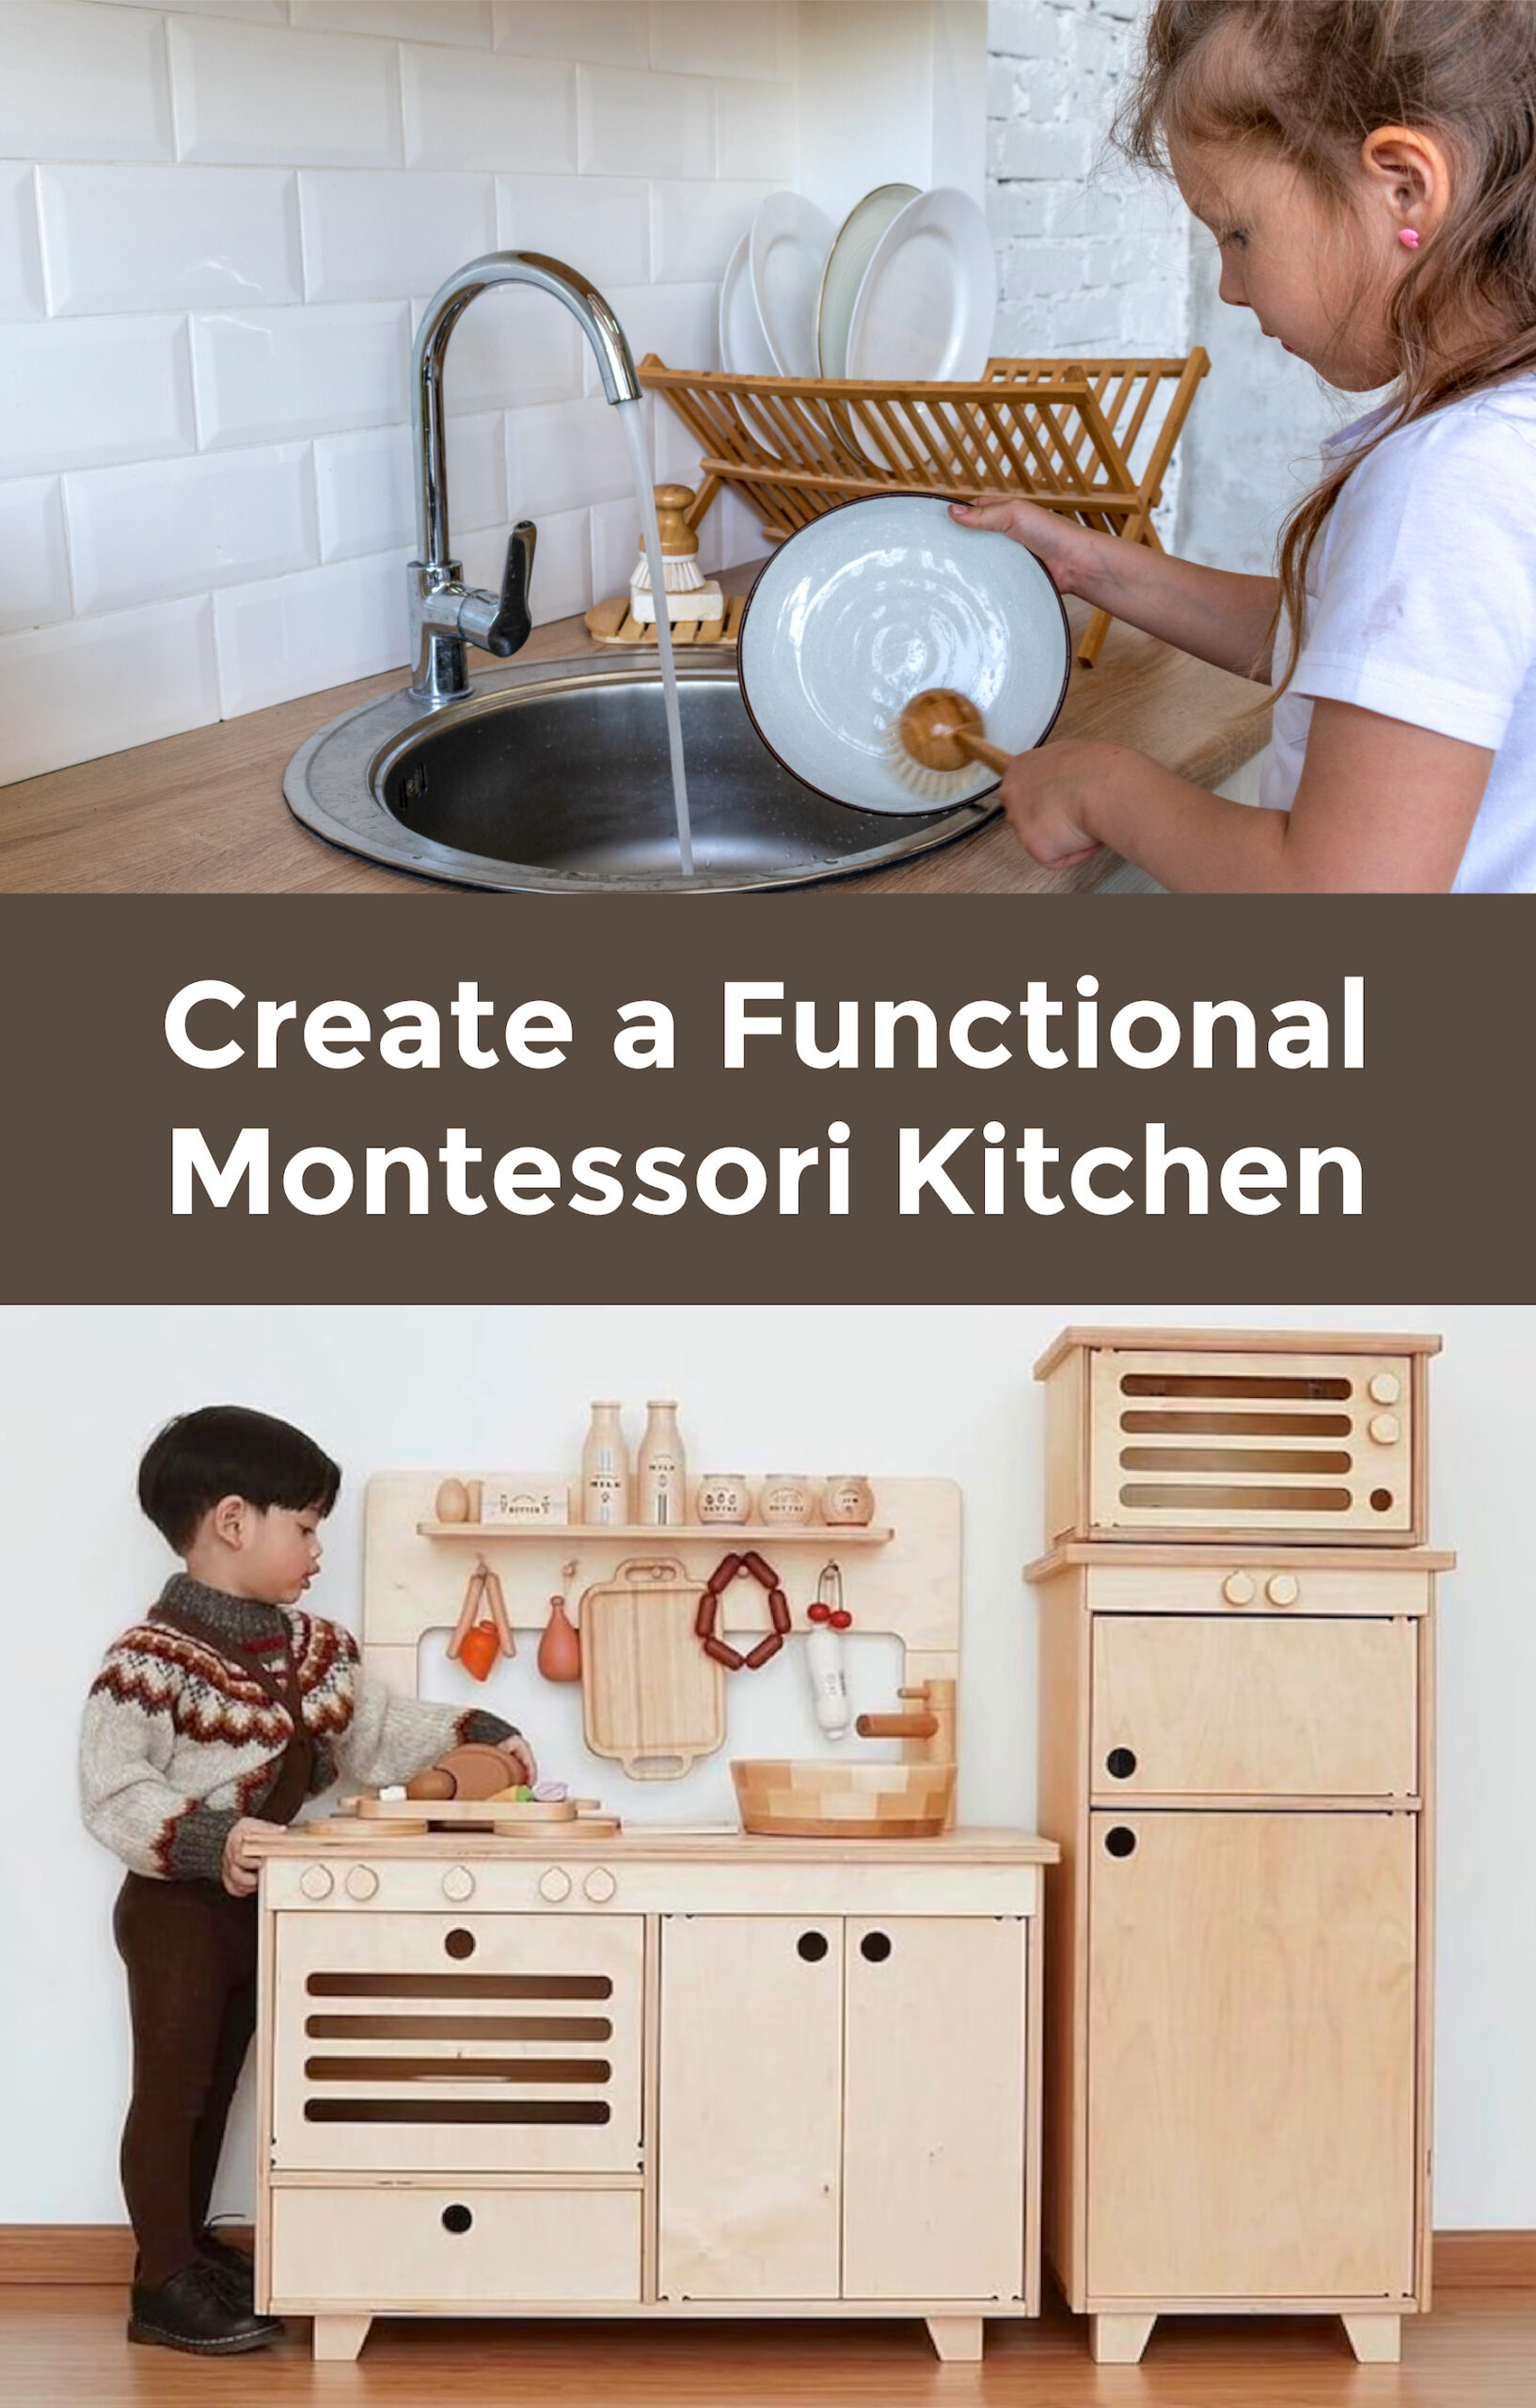 How To Create a Montessori Functional Toddler Kitchen